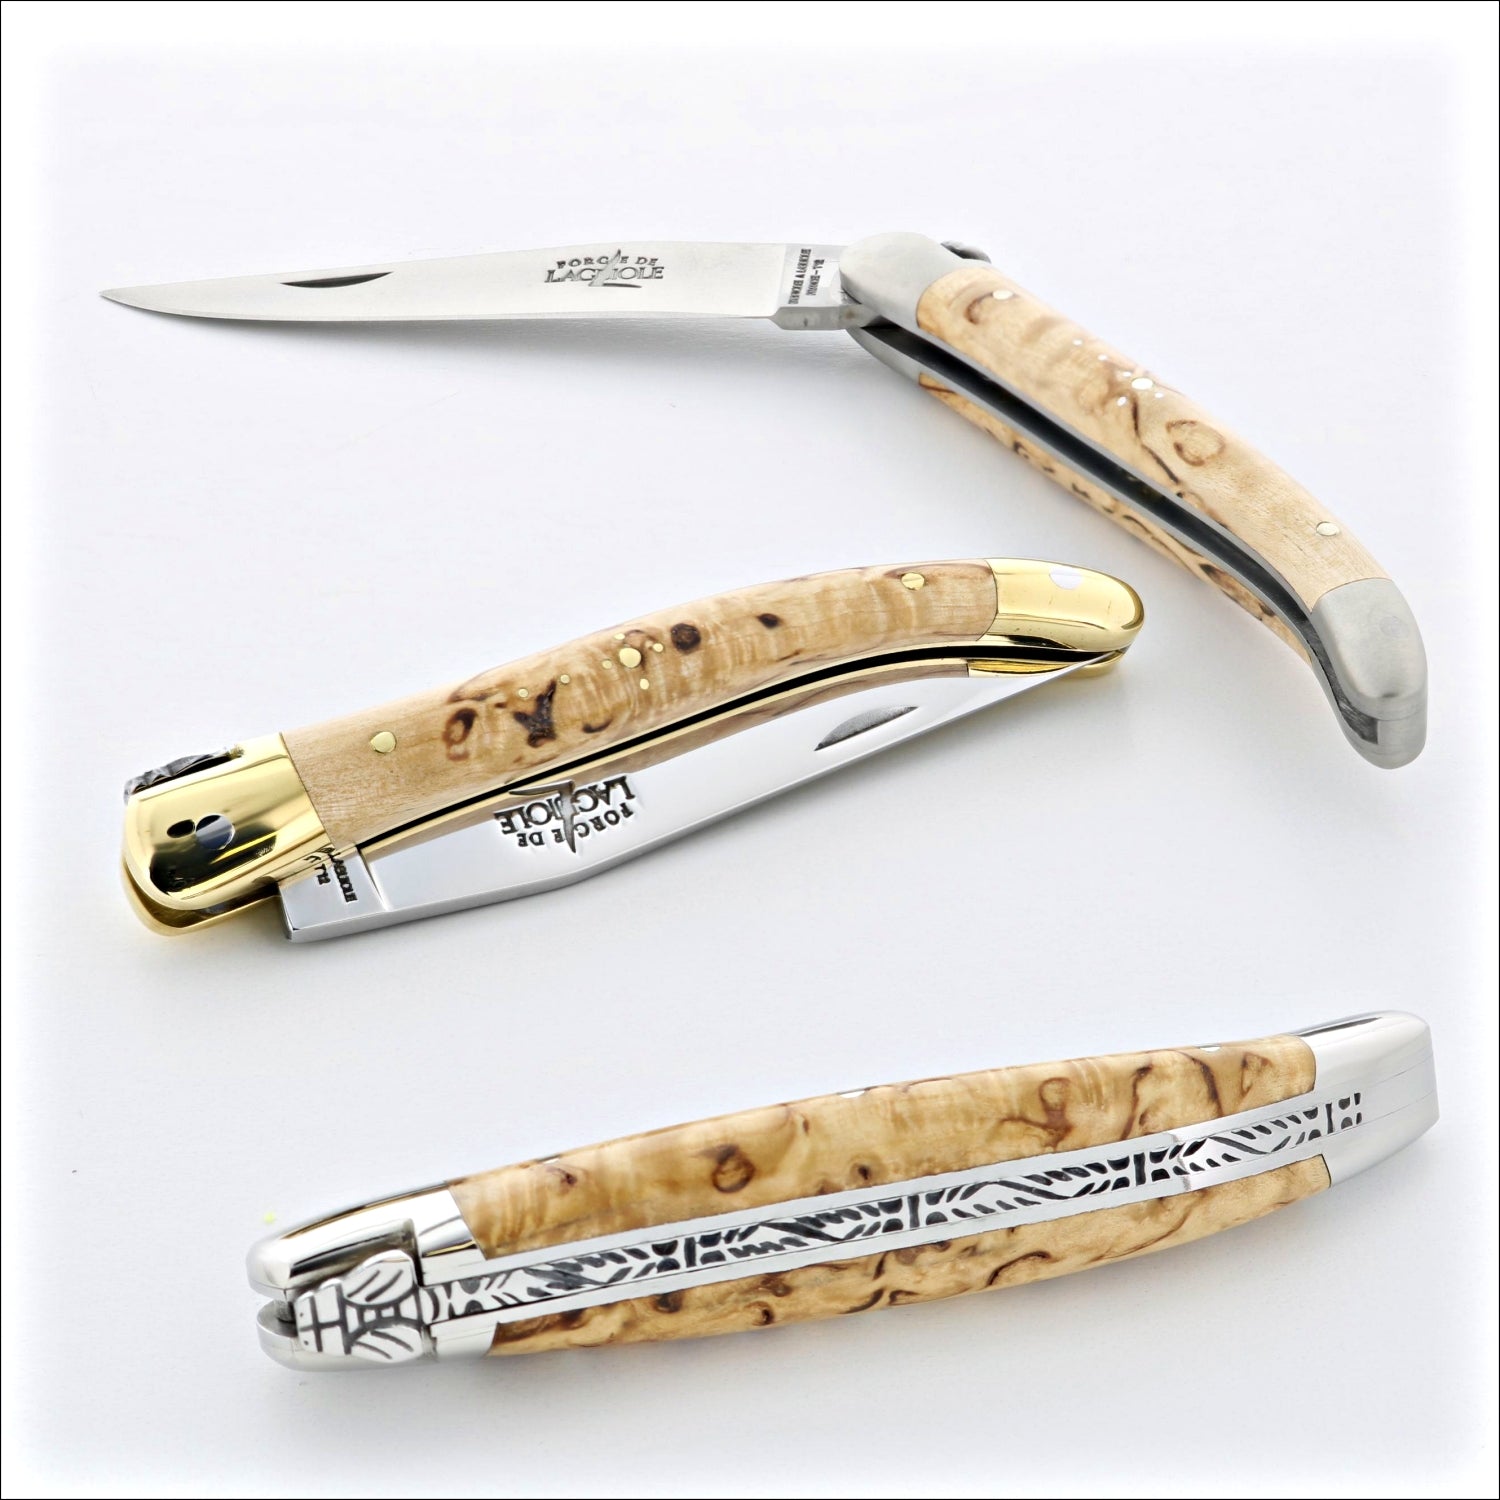 Laguiole Forged Steak Knives Karelian Birch by fontenille pataud - Laguiole  Imports